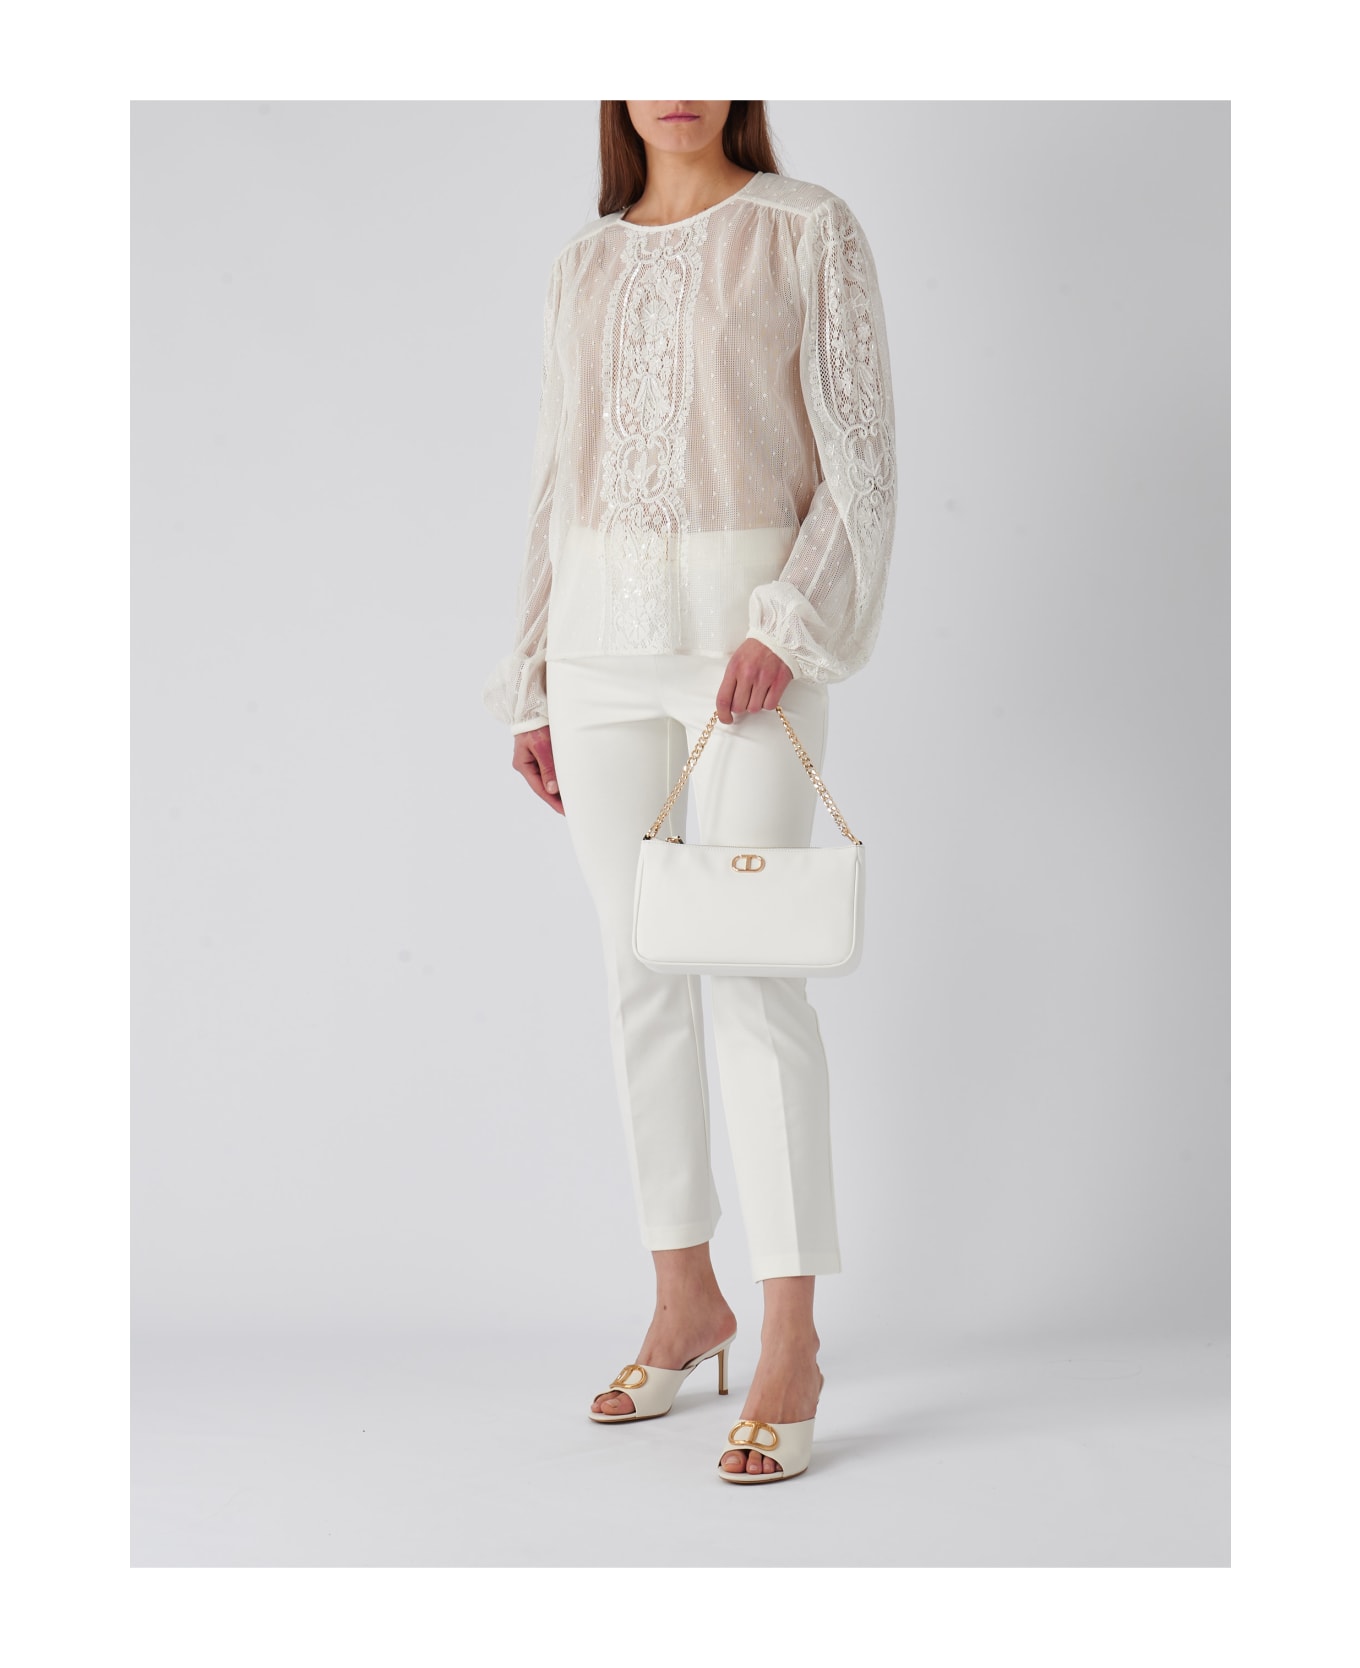 TwinSet Poliester Blouse - BIANCO